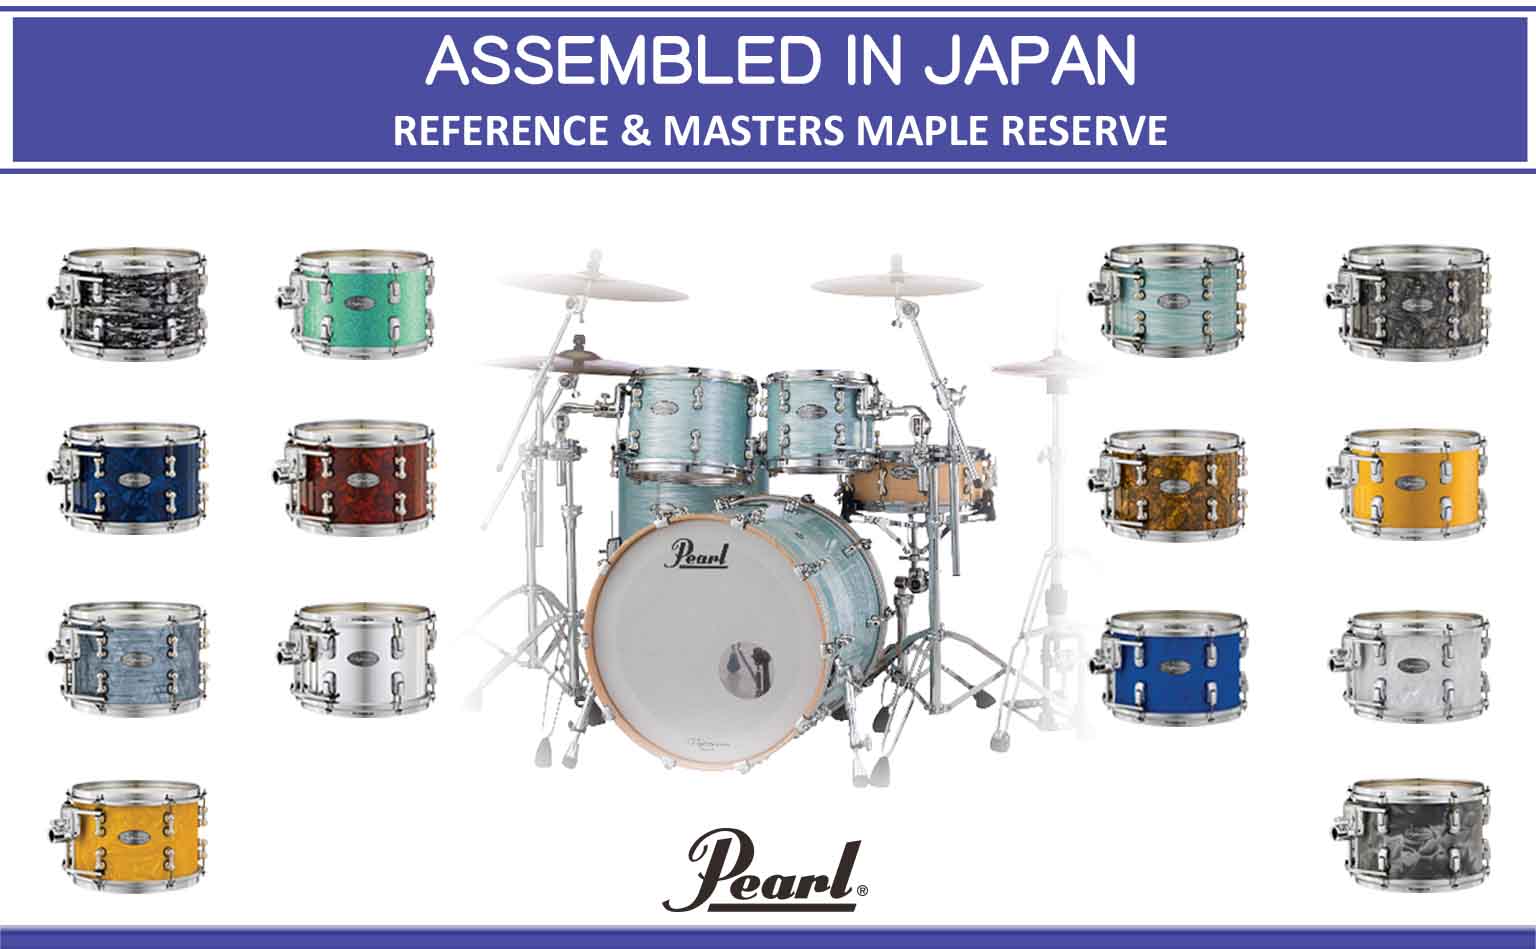 Assembled in Japan